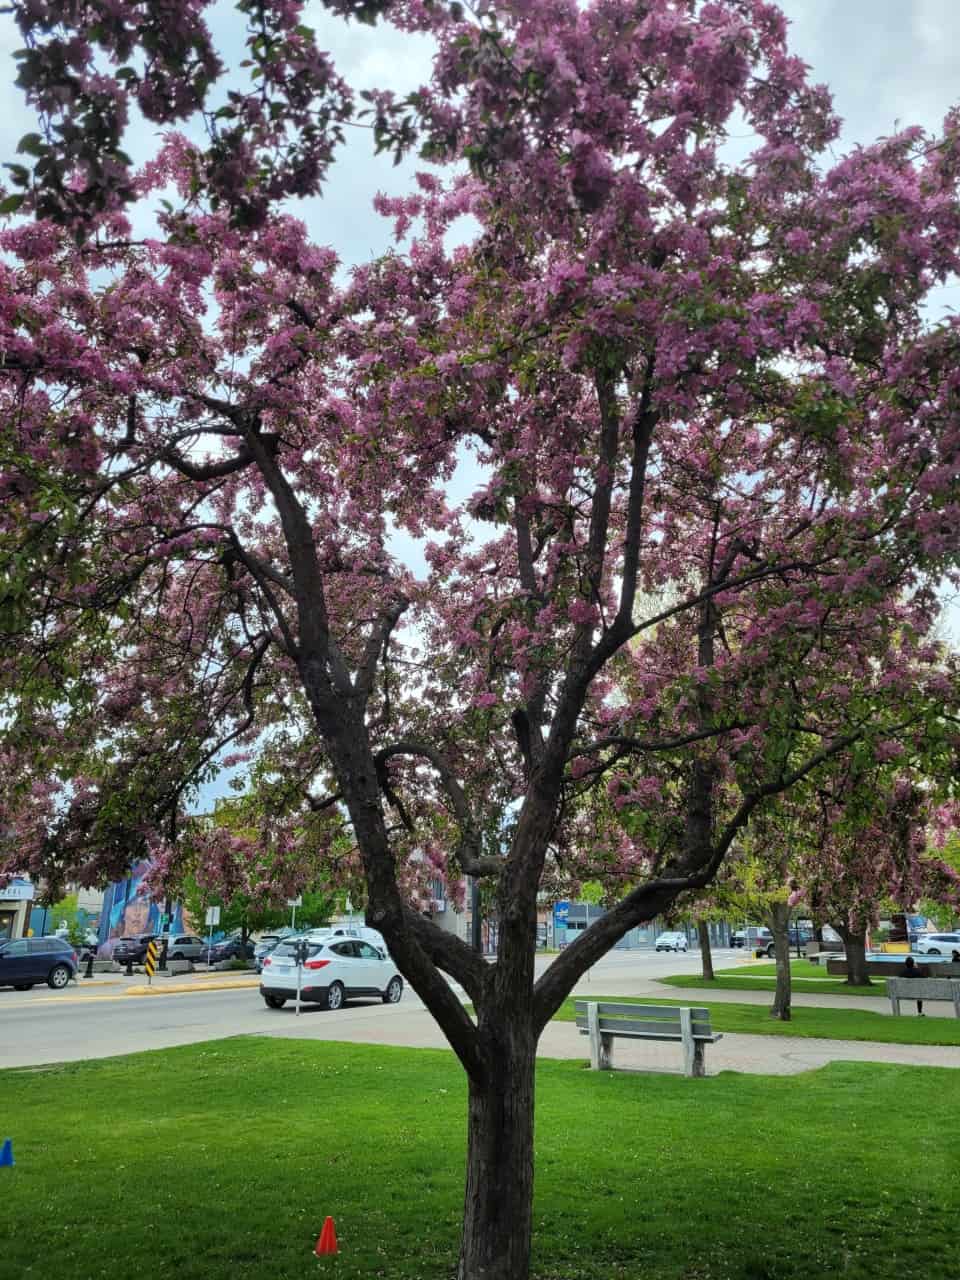 Crab Apples blossoming at Vernon City Hall - Entering the main park area near city hall is stunning thanks to these blossoming crab apple trees!